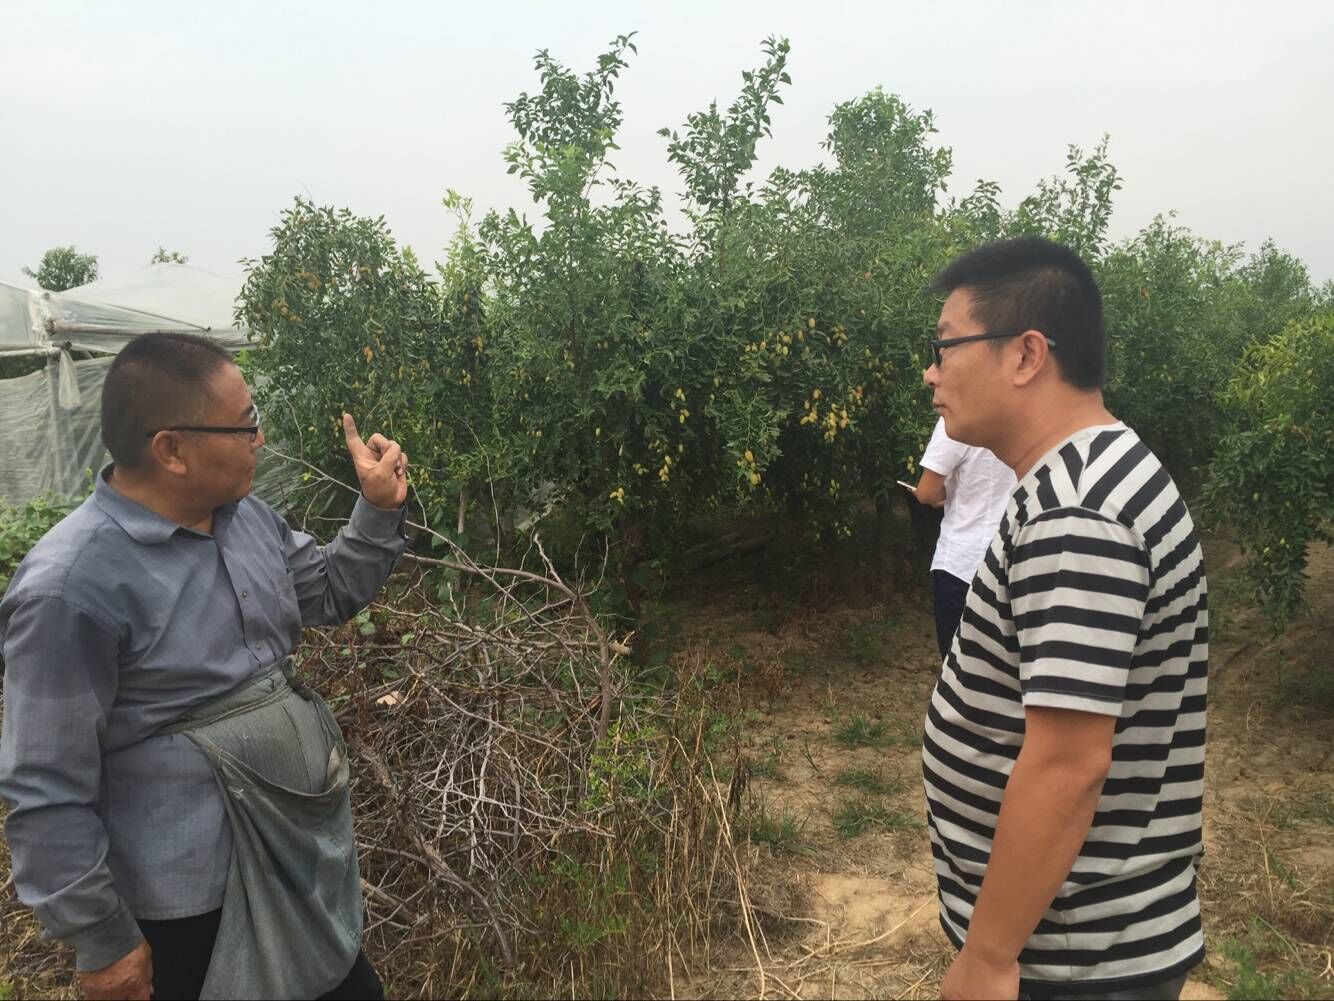 Alkaline Soil turned into Fertile soil “Fubon” makes the jujubes high-yield and sweeter.